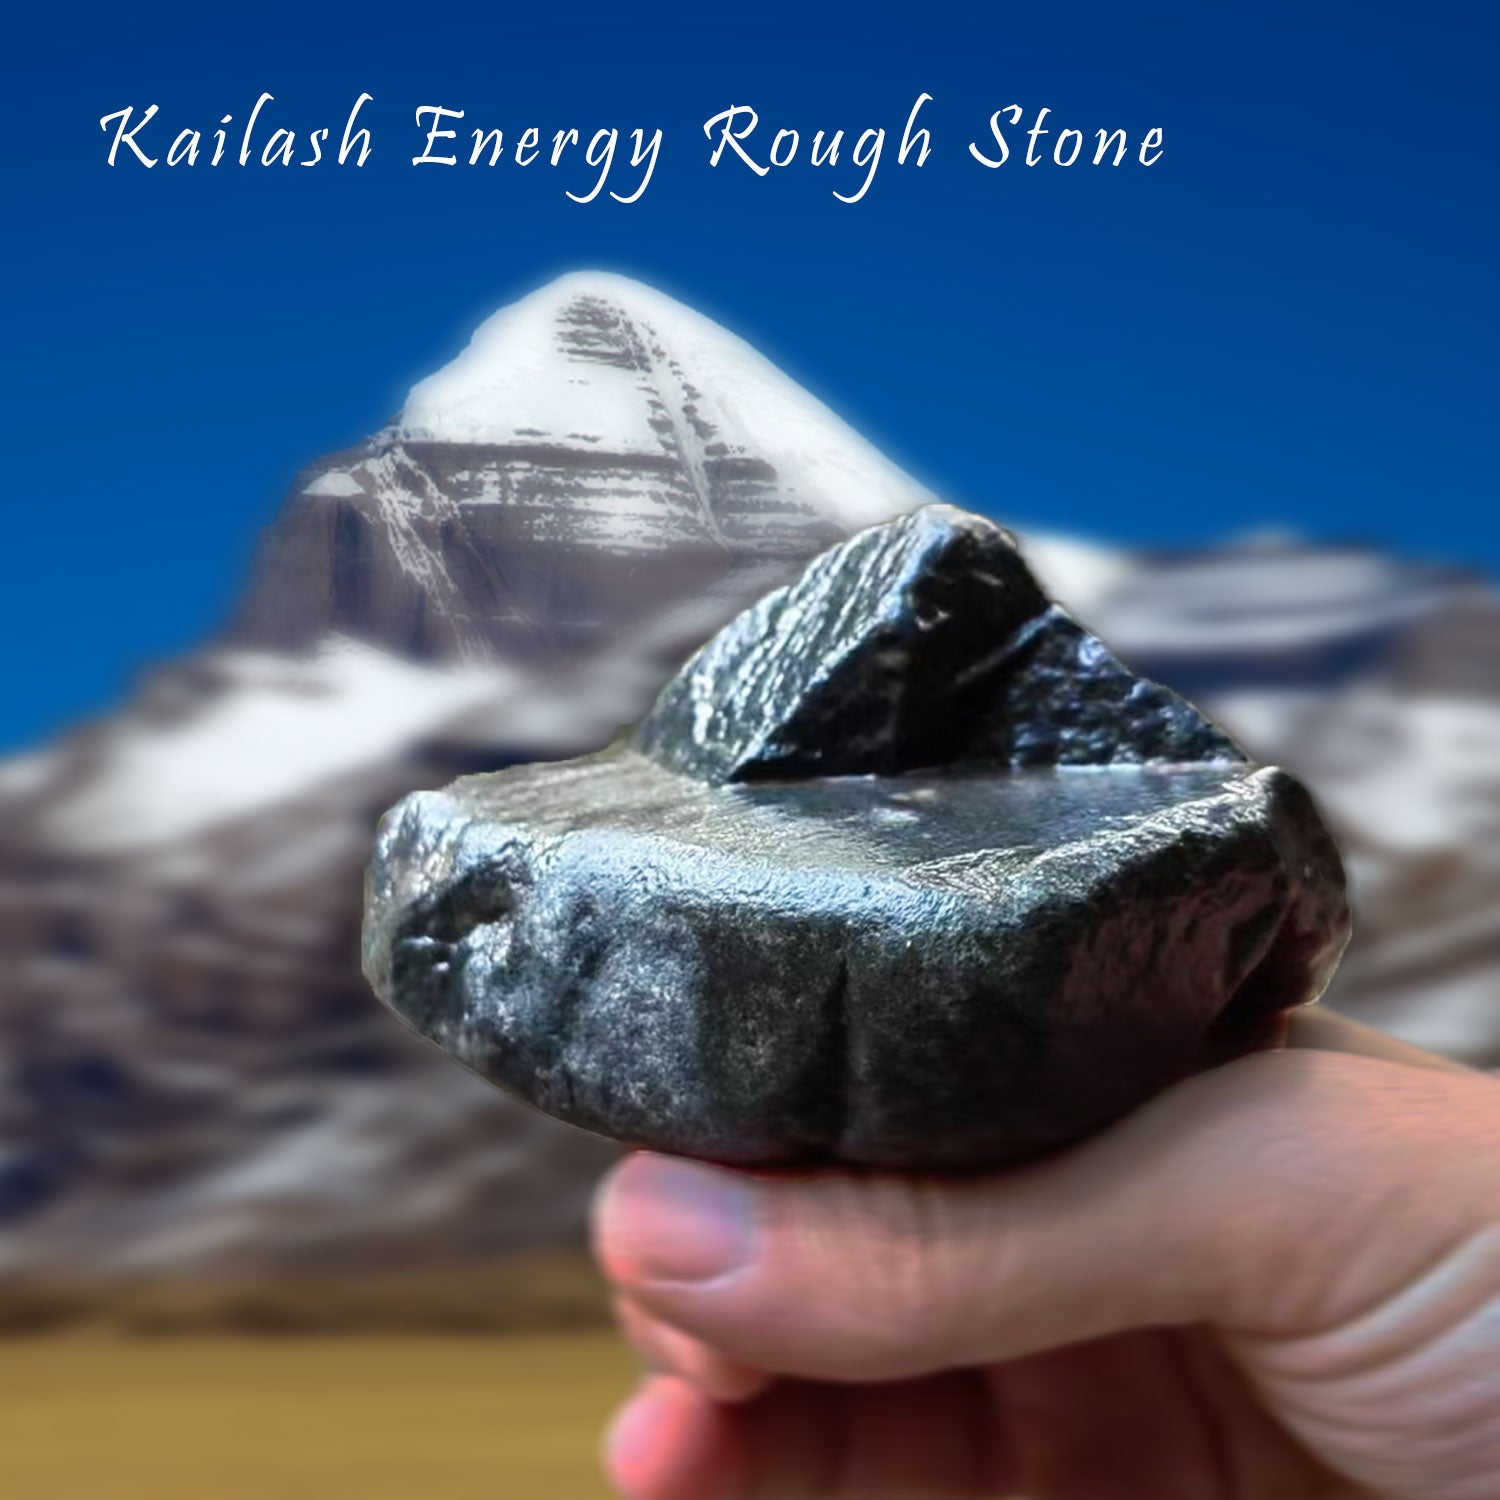 Courage Stone Energy blessing stone from Kailash